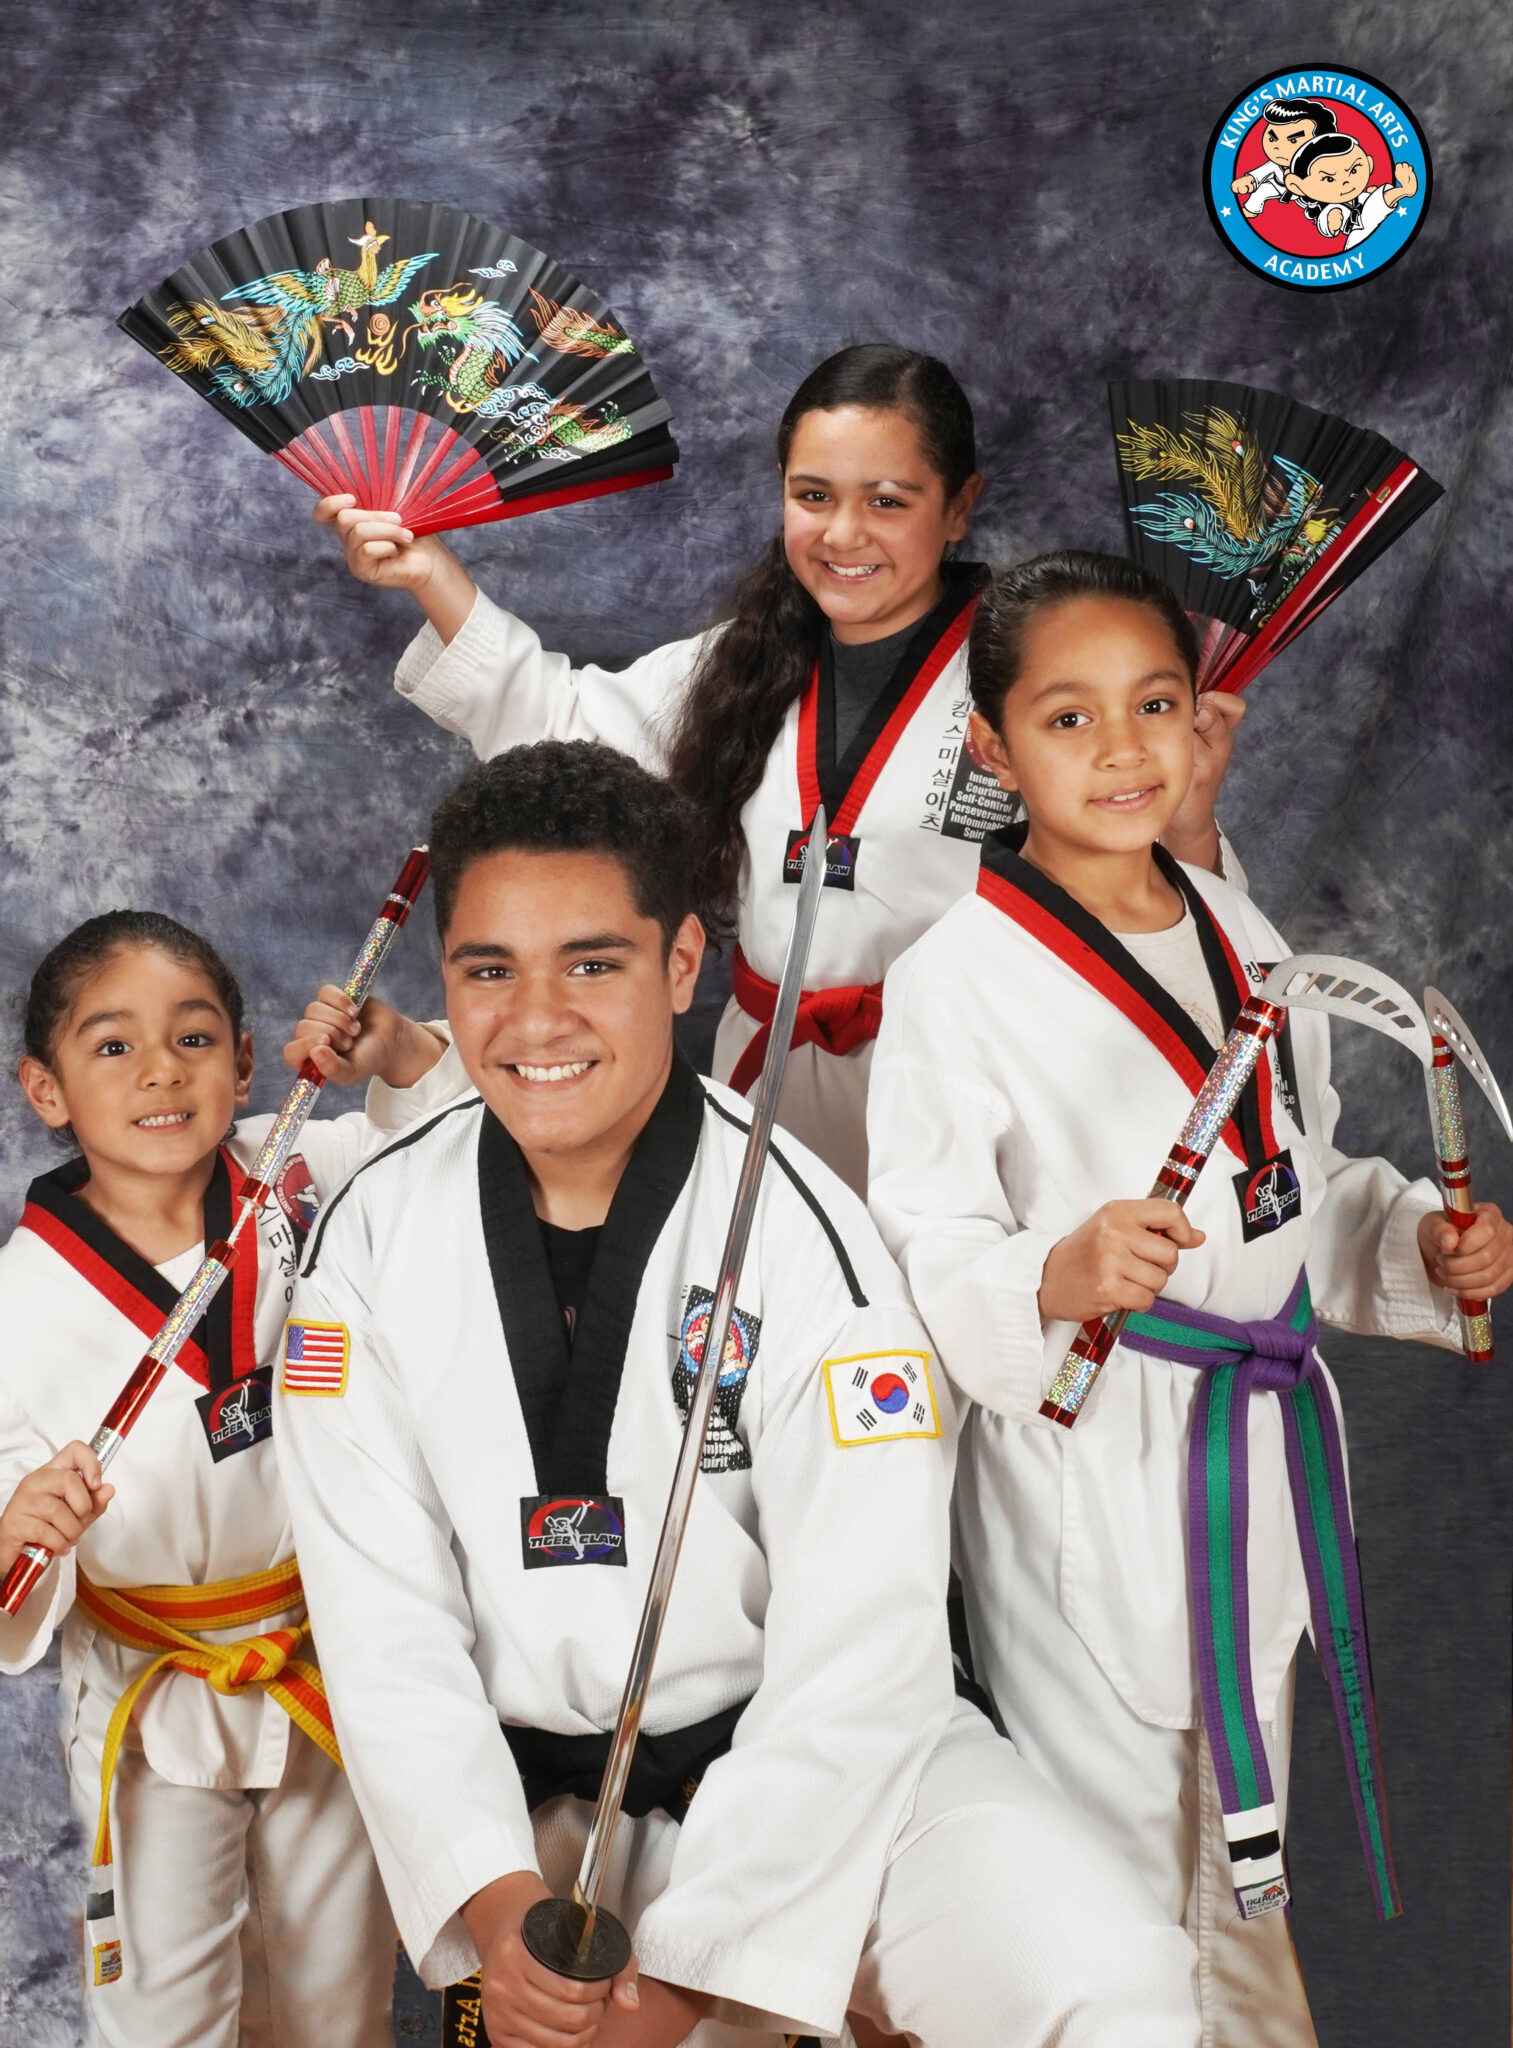 King's Martial Arts Academy Family Classes